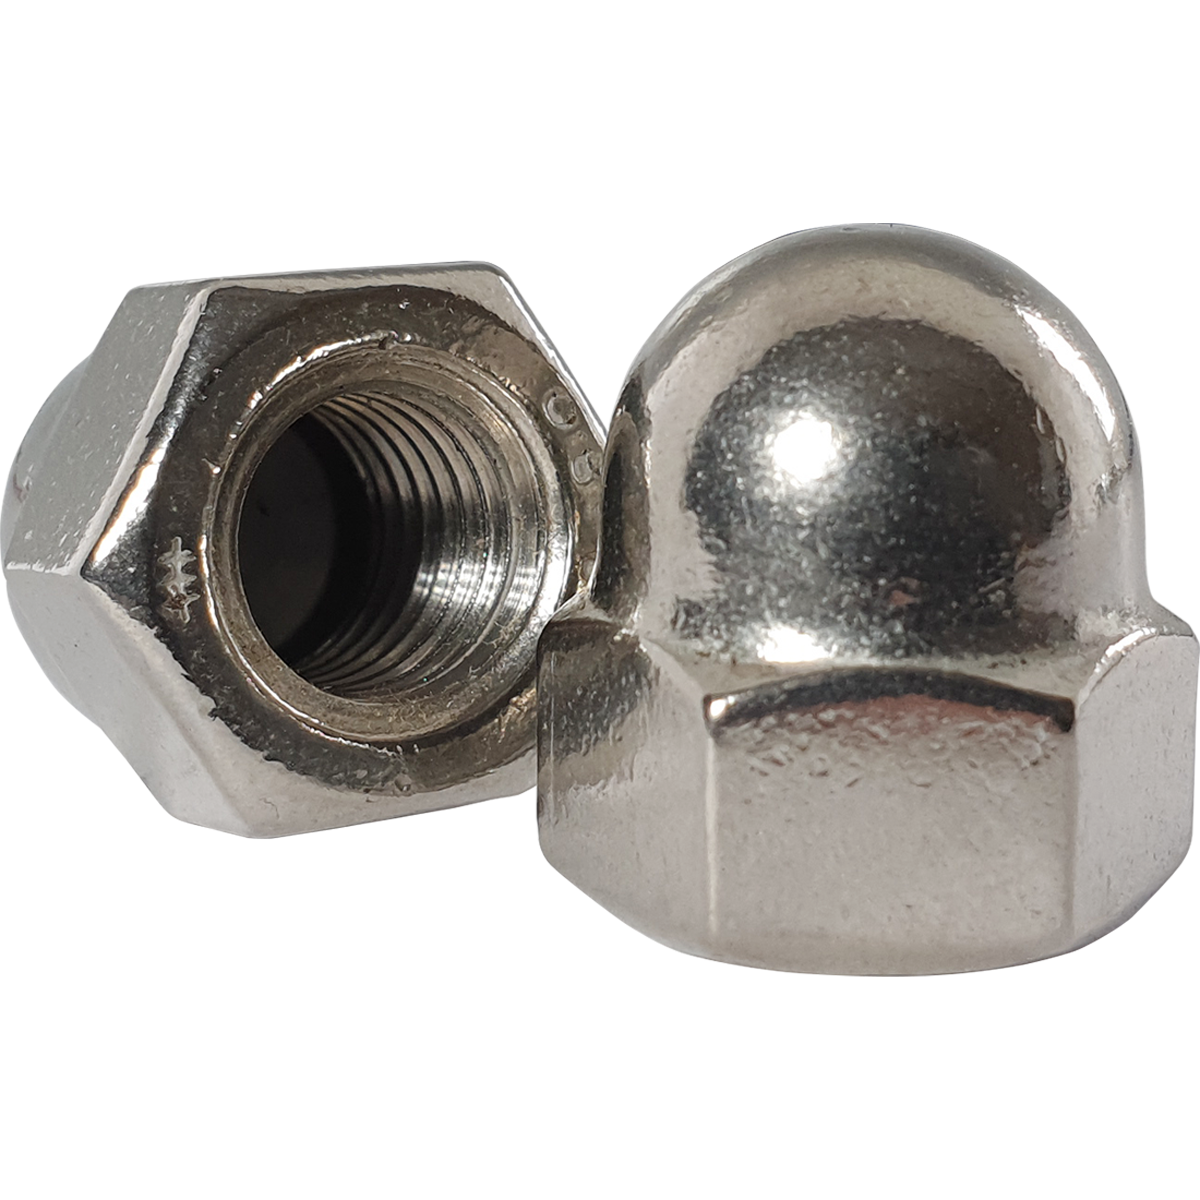 A2 stainless steel dome head nuts, also known as dome head hex nuts, capped nuts, or acorn nuts, due to the nut shape.